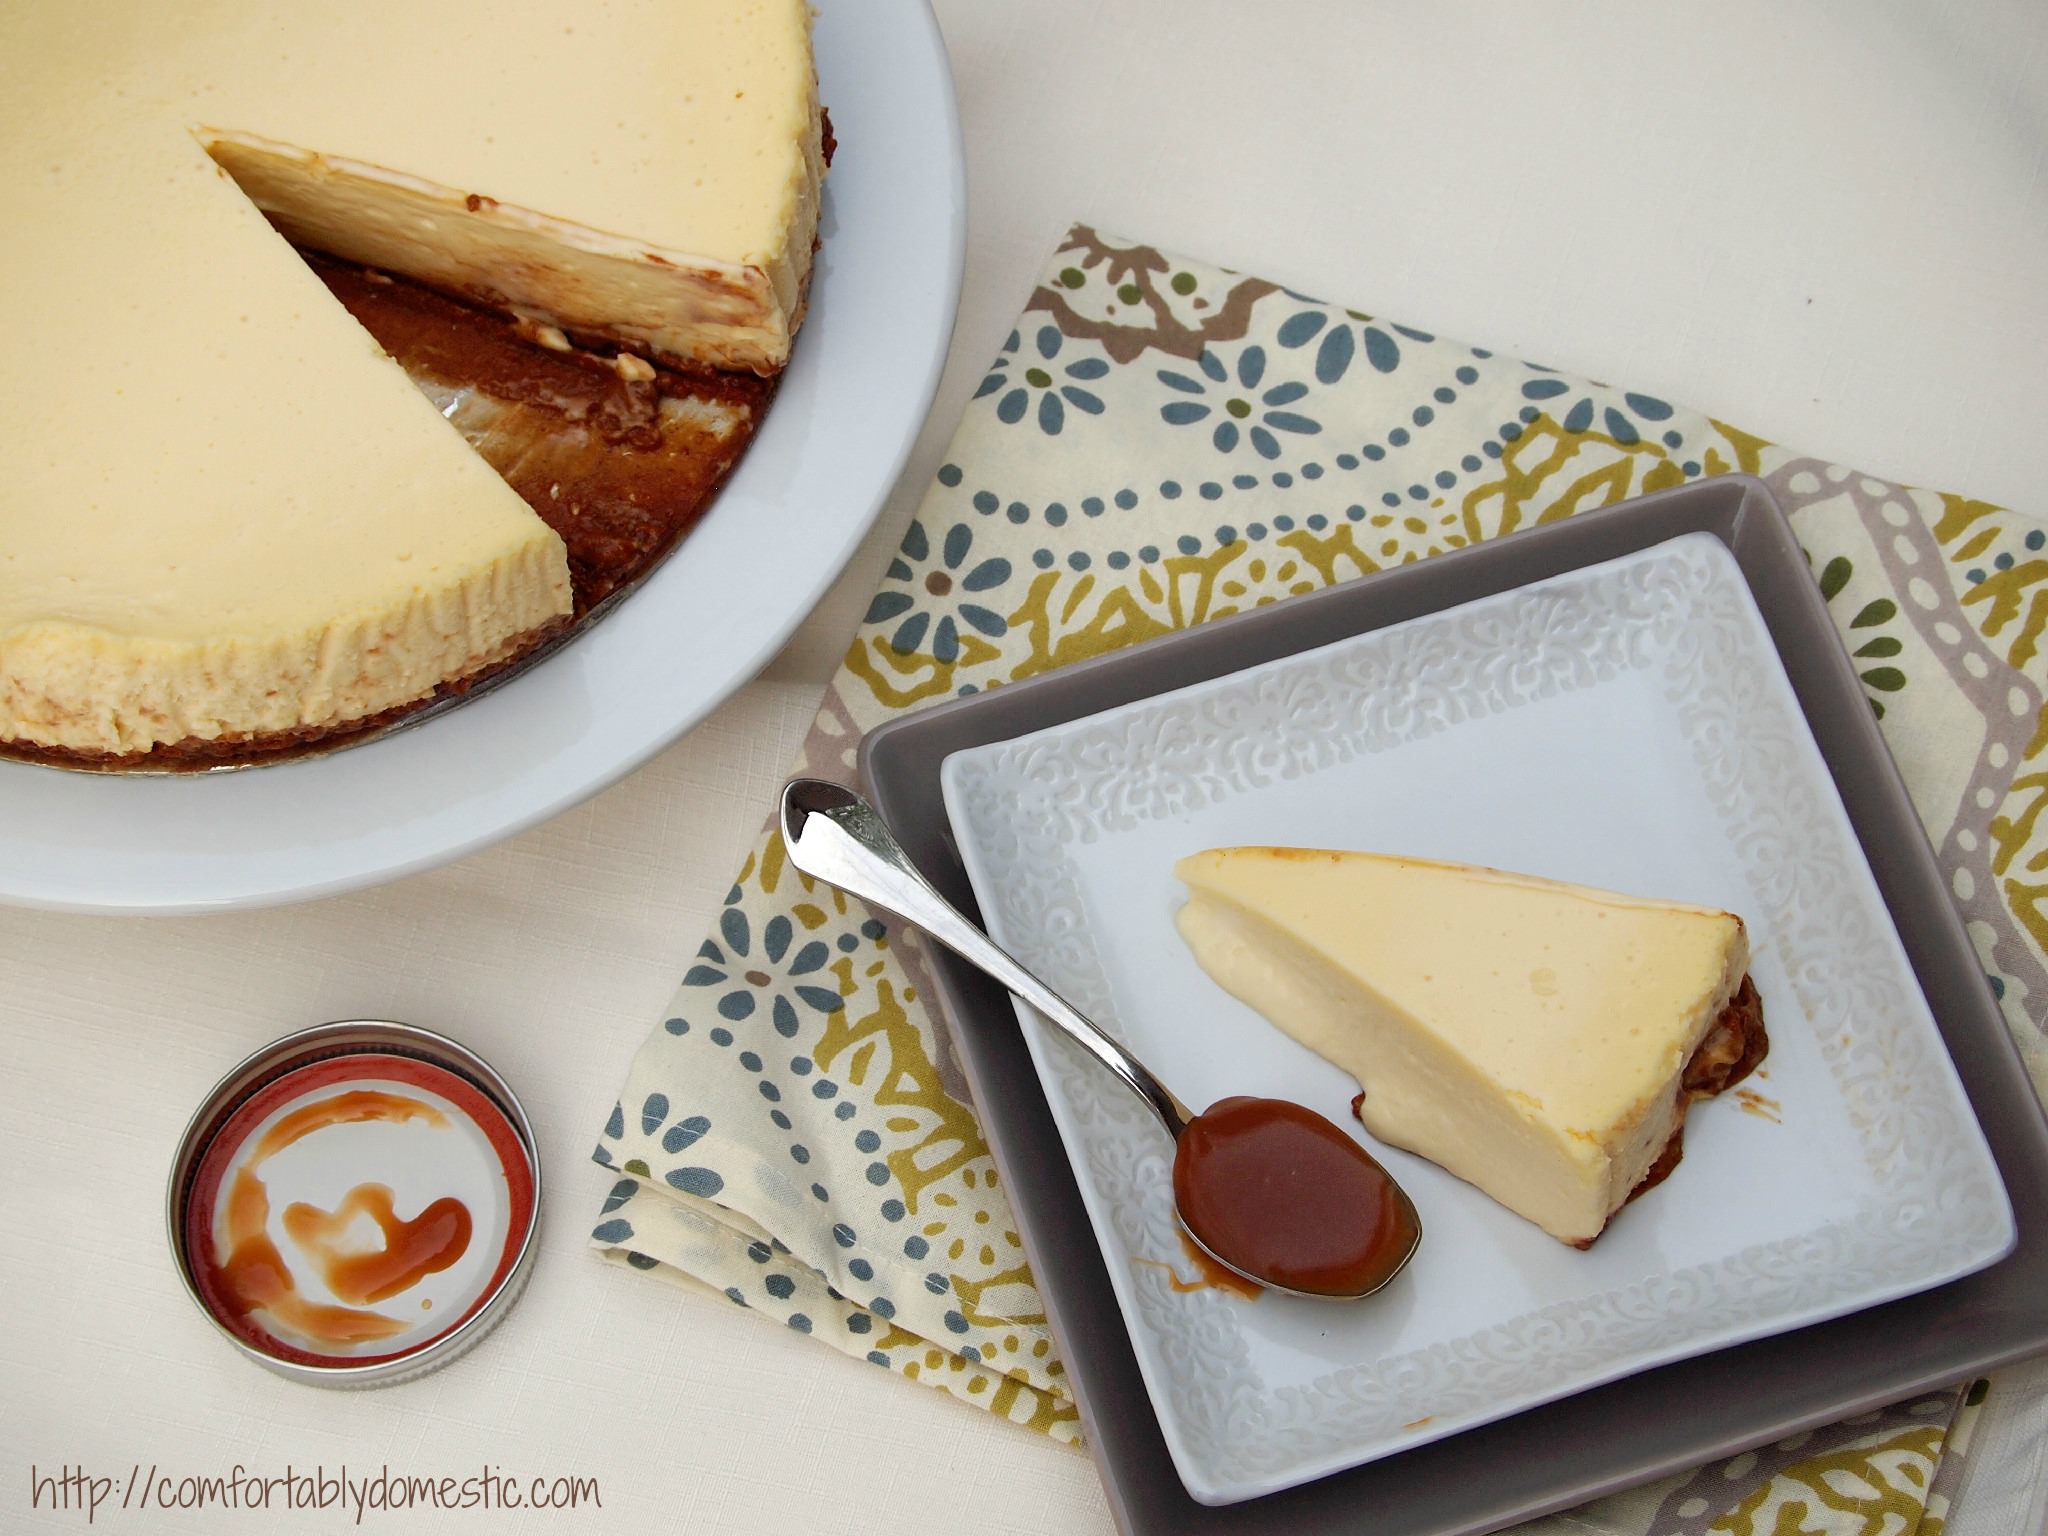 How to Bake a Positively Perfect Cheesecake